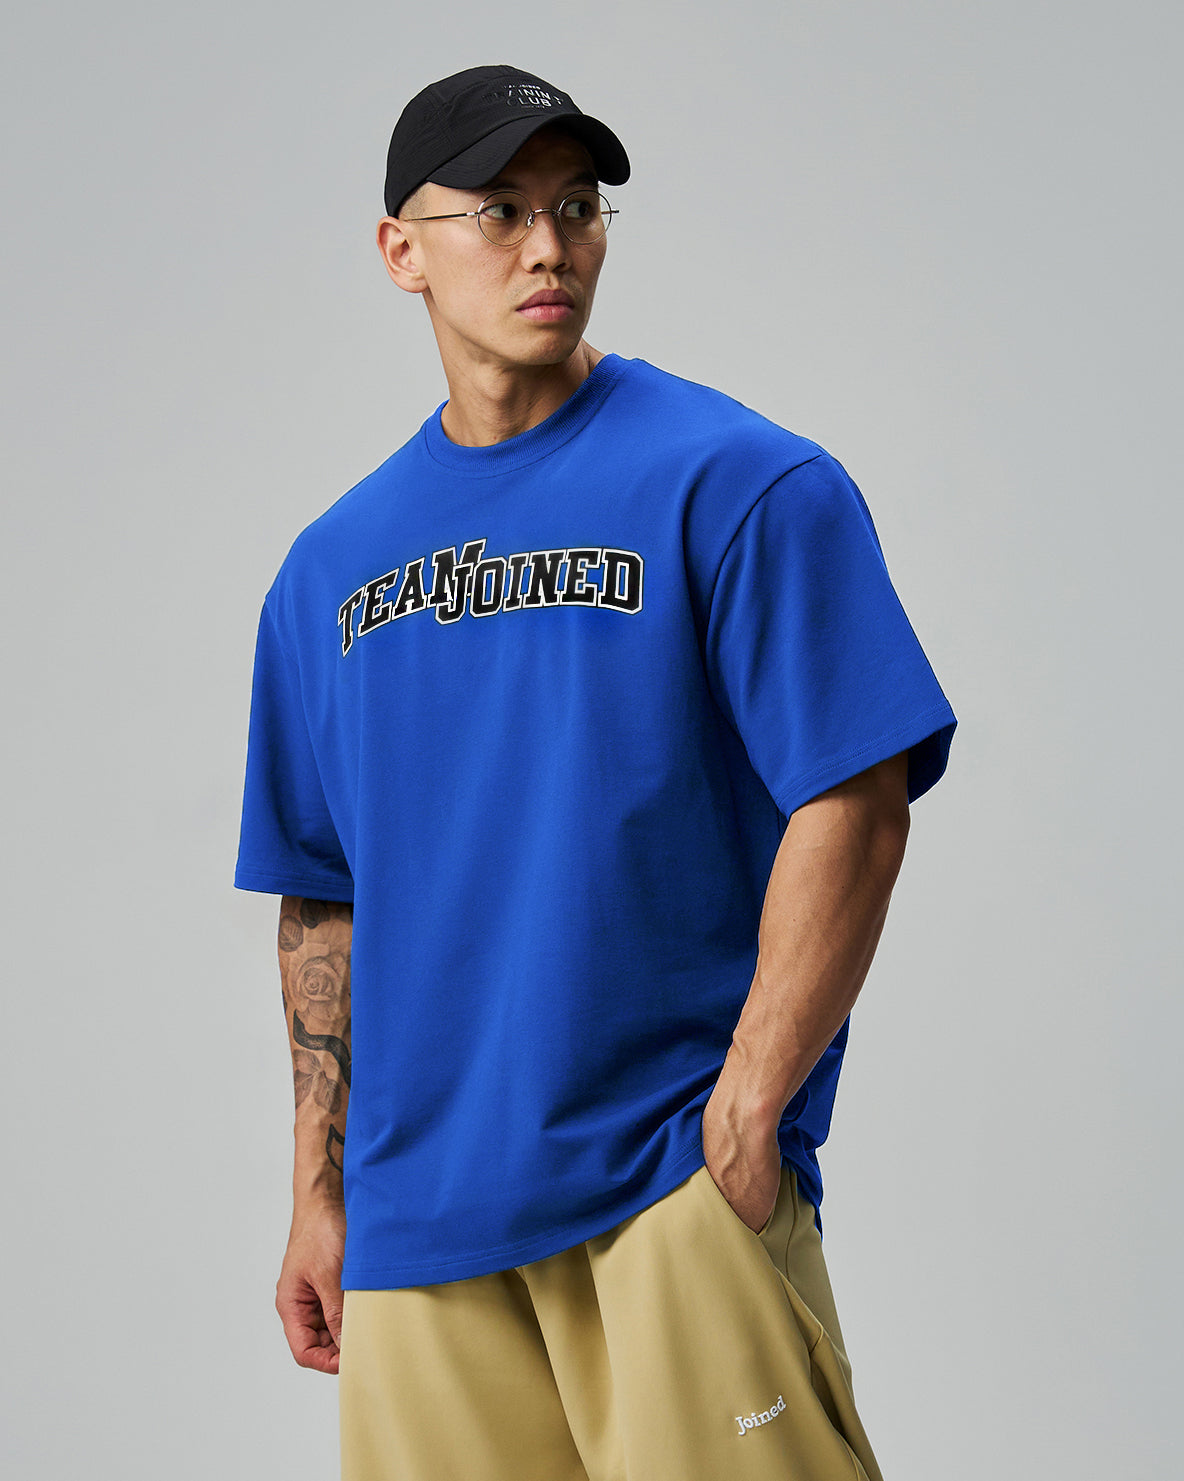 Authentic Oversized｜TeamJoined® Hong Kong, 香港健身品牌 – Joined® Hong Kong